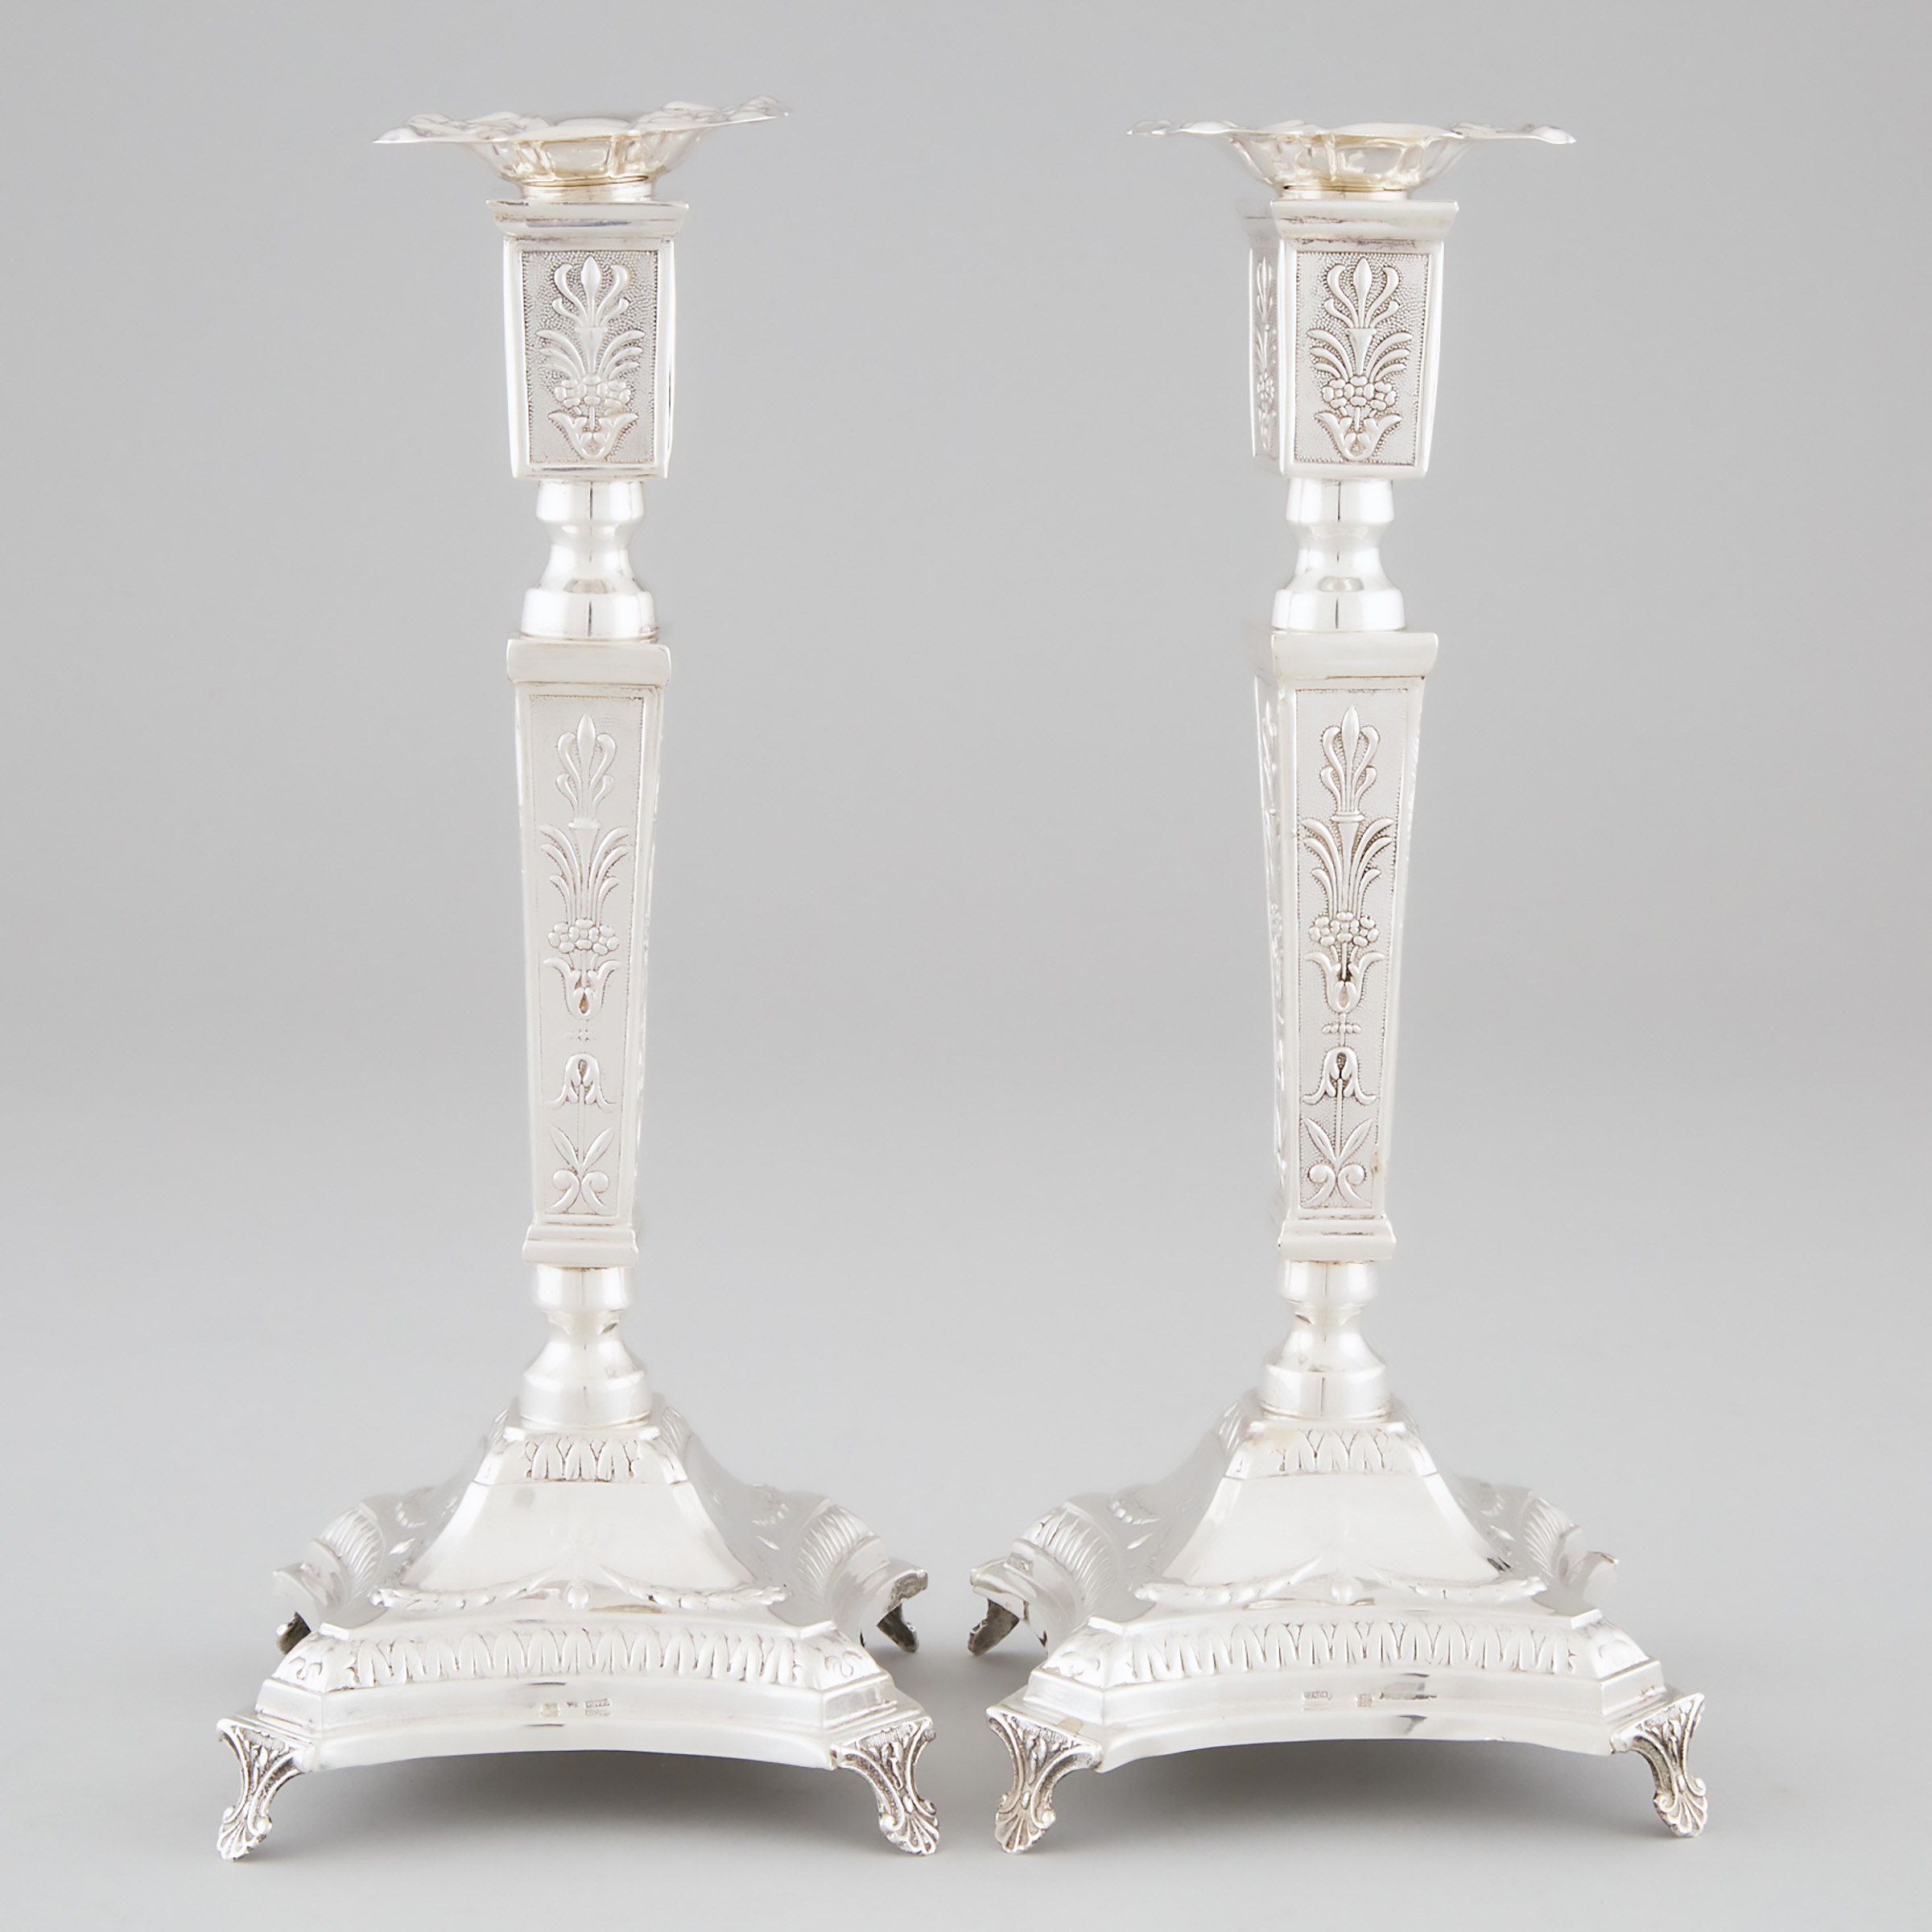 Pair of Israeli Silver Table Candlesticks  2a56b0